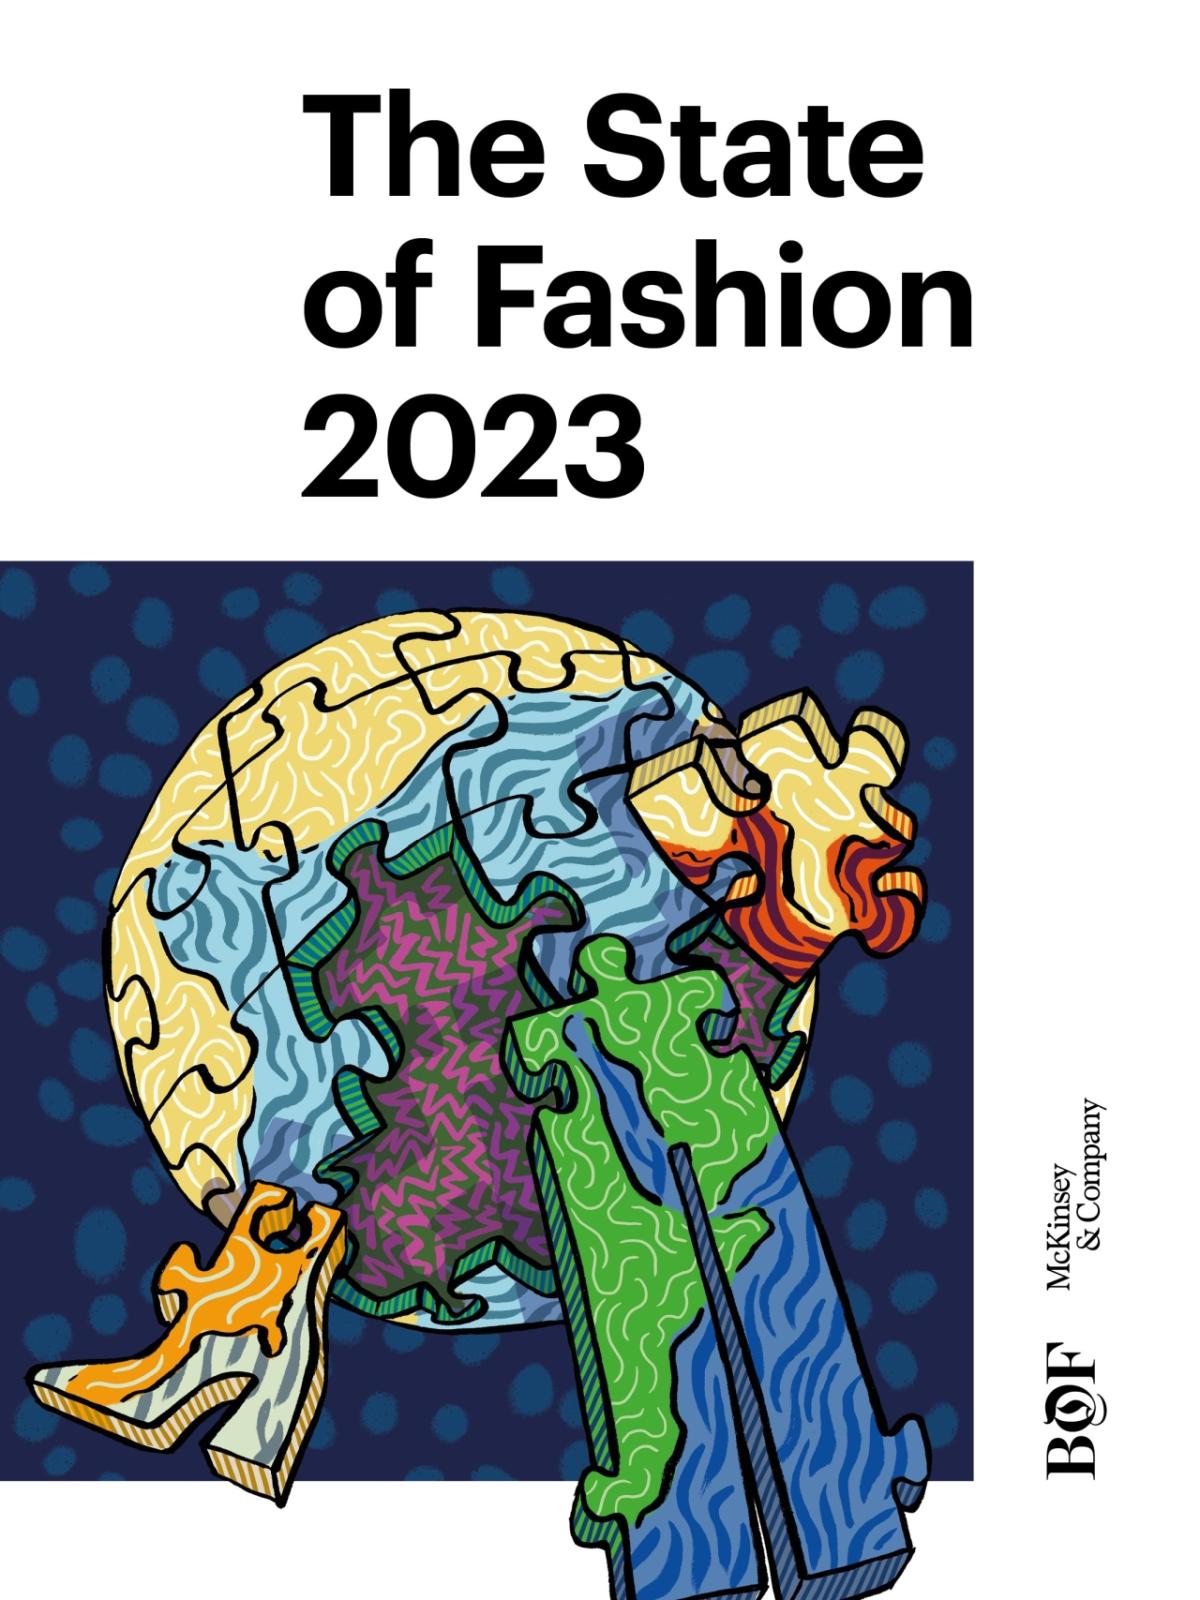 cover of BoF The State of Fashion 2023 report 